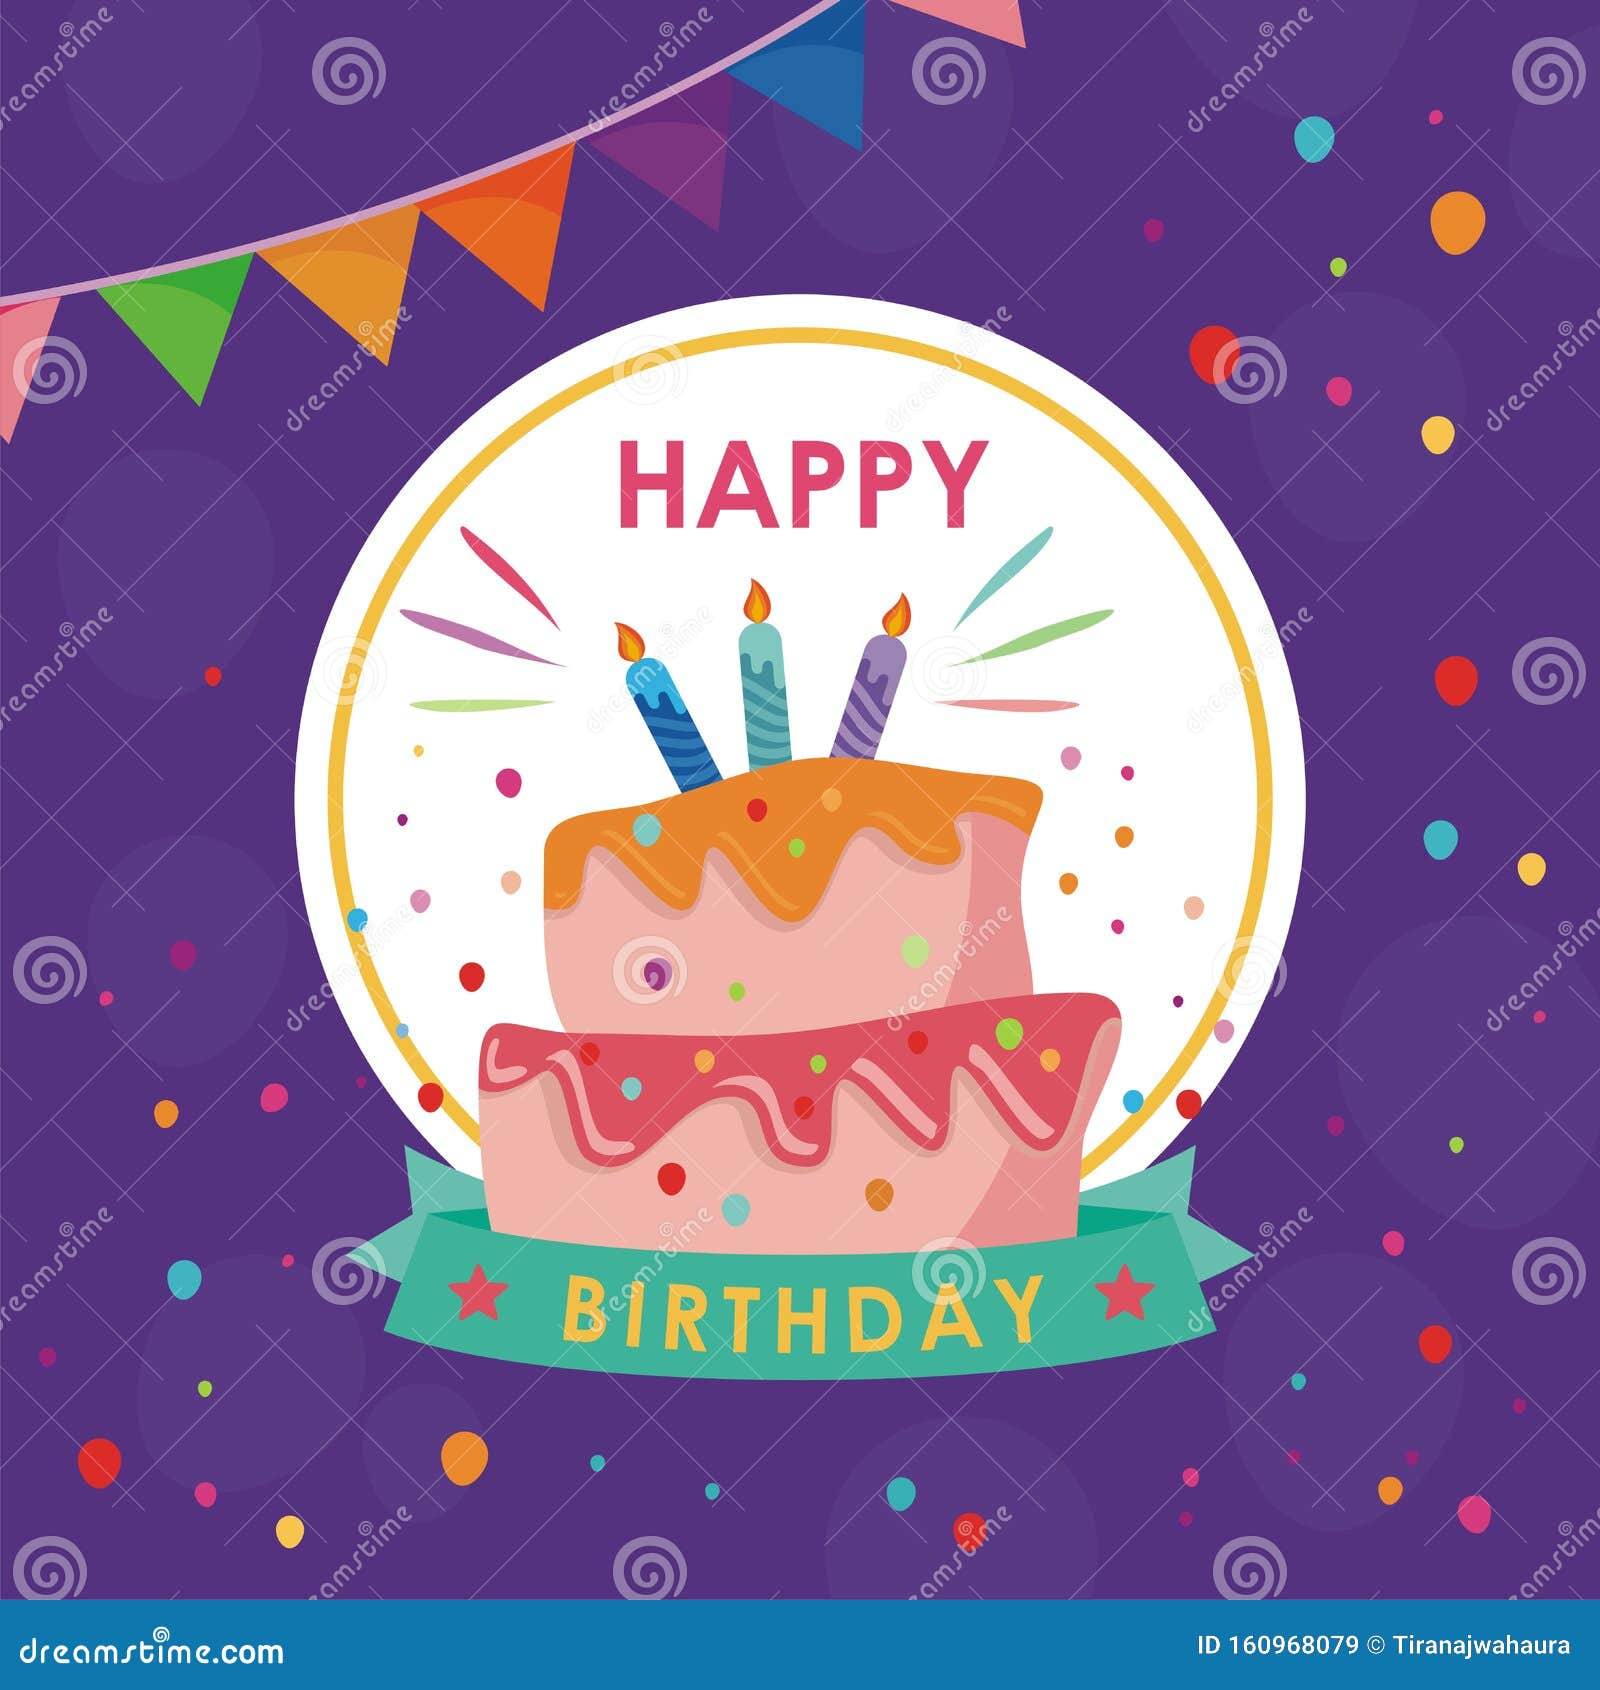 Happy Birthday Card Template Design With Trendy And Cute Design Stock Vector Illustration Of Elegant Border